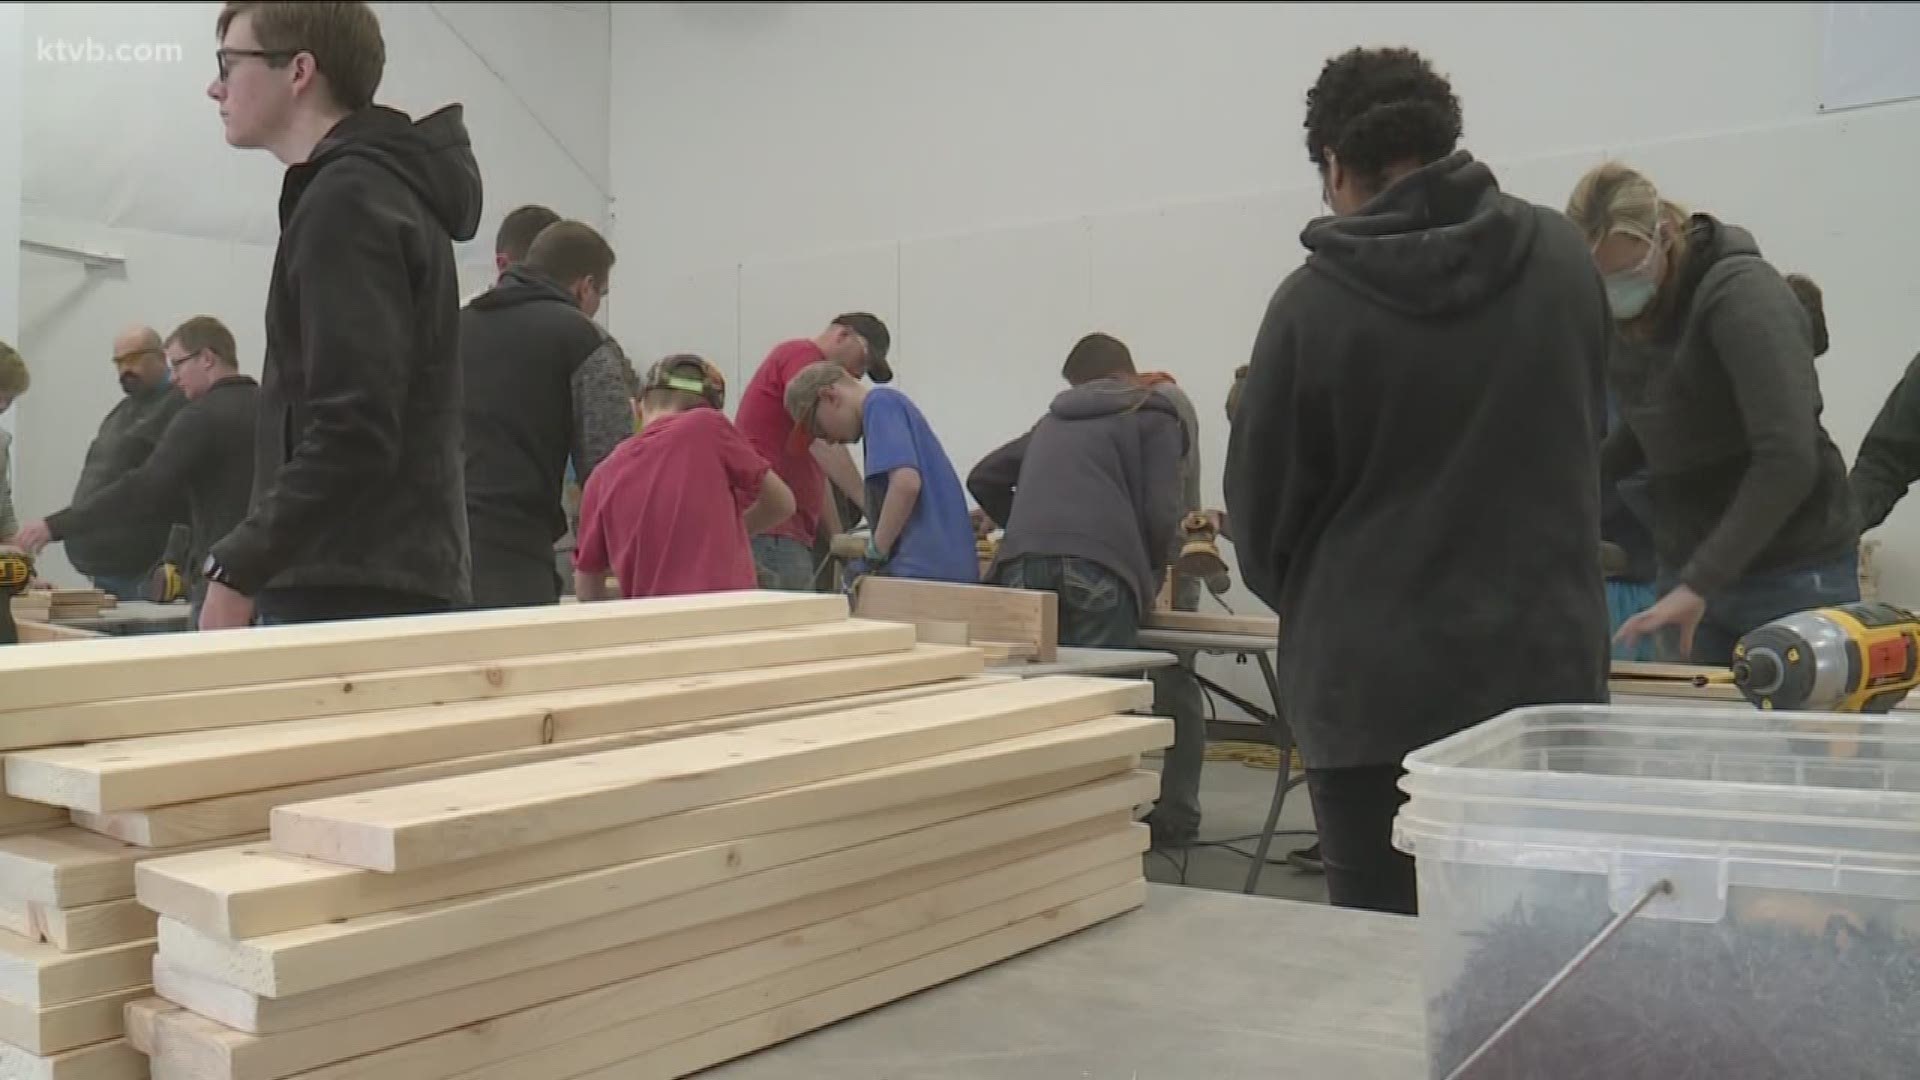 The charity hopes to build 200-300 bunk beds at their new warehouse for families in need throughout the Treasure Valley.